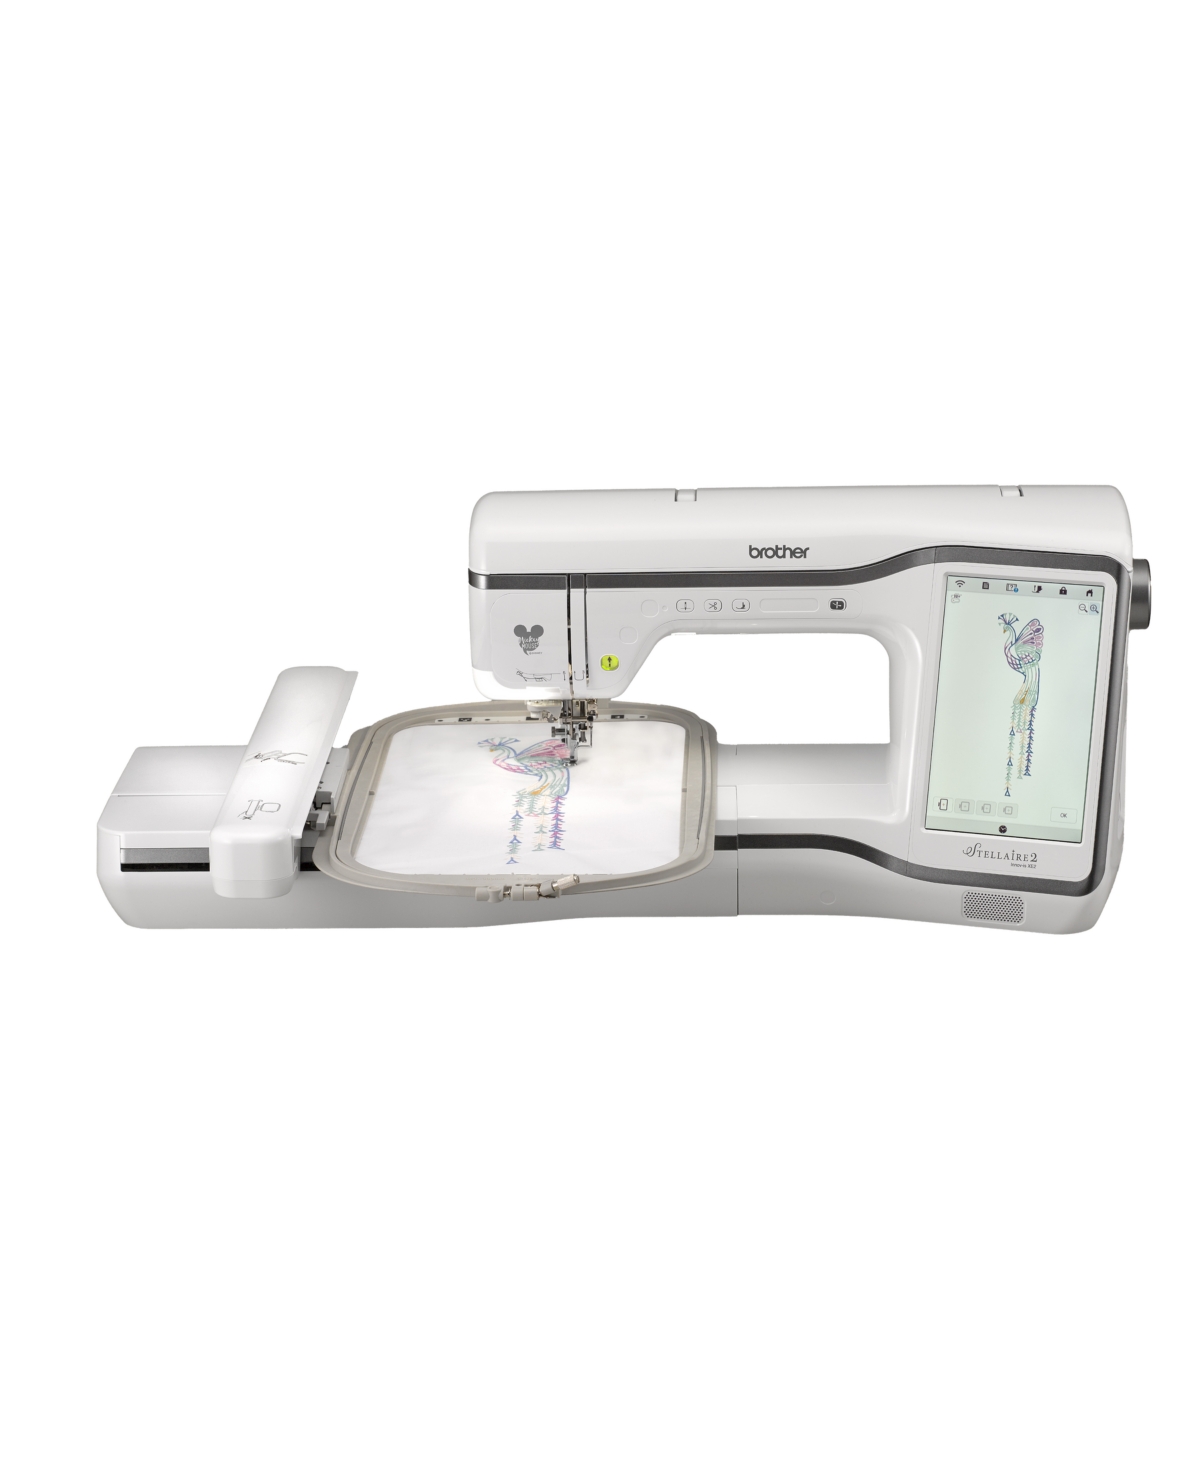 Stellaire Innov-is XE2 Embroidery Machine 14x9.5 - White